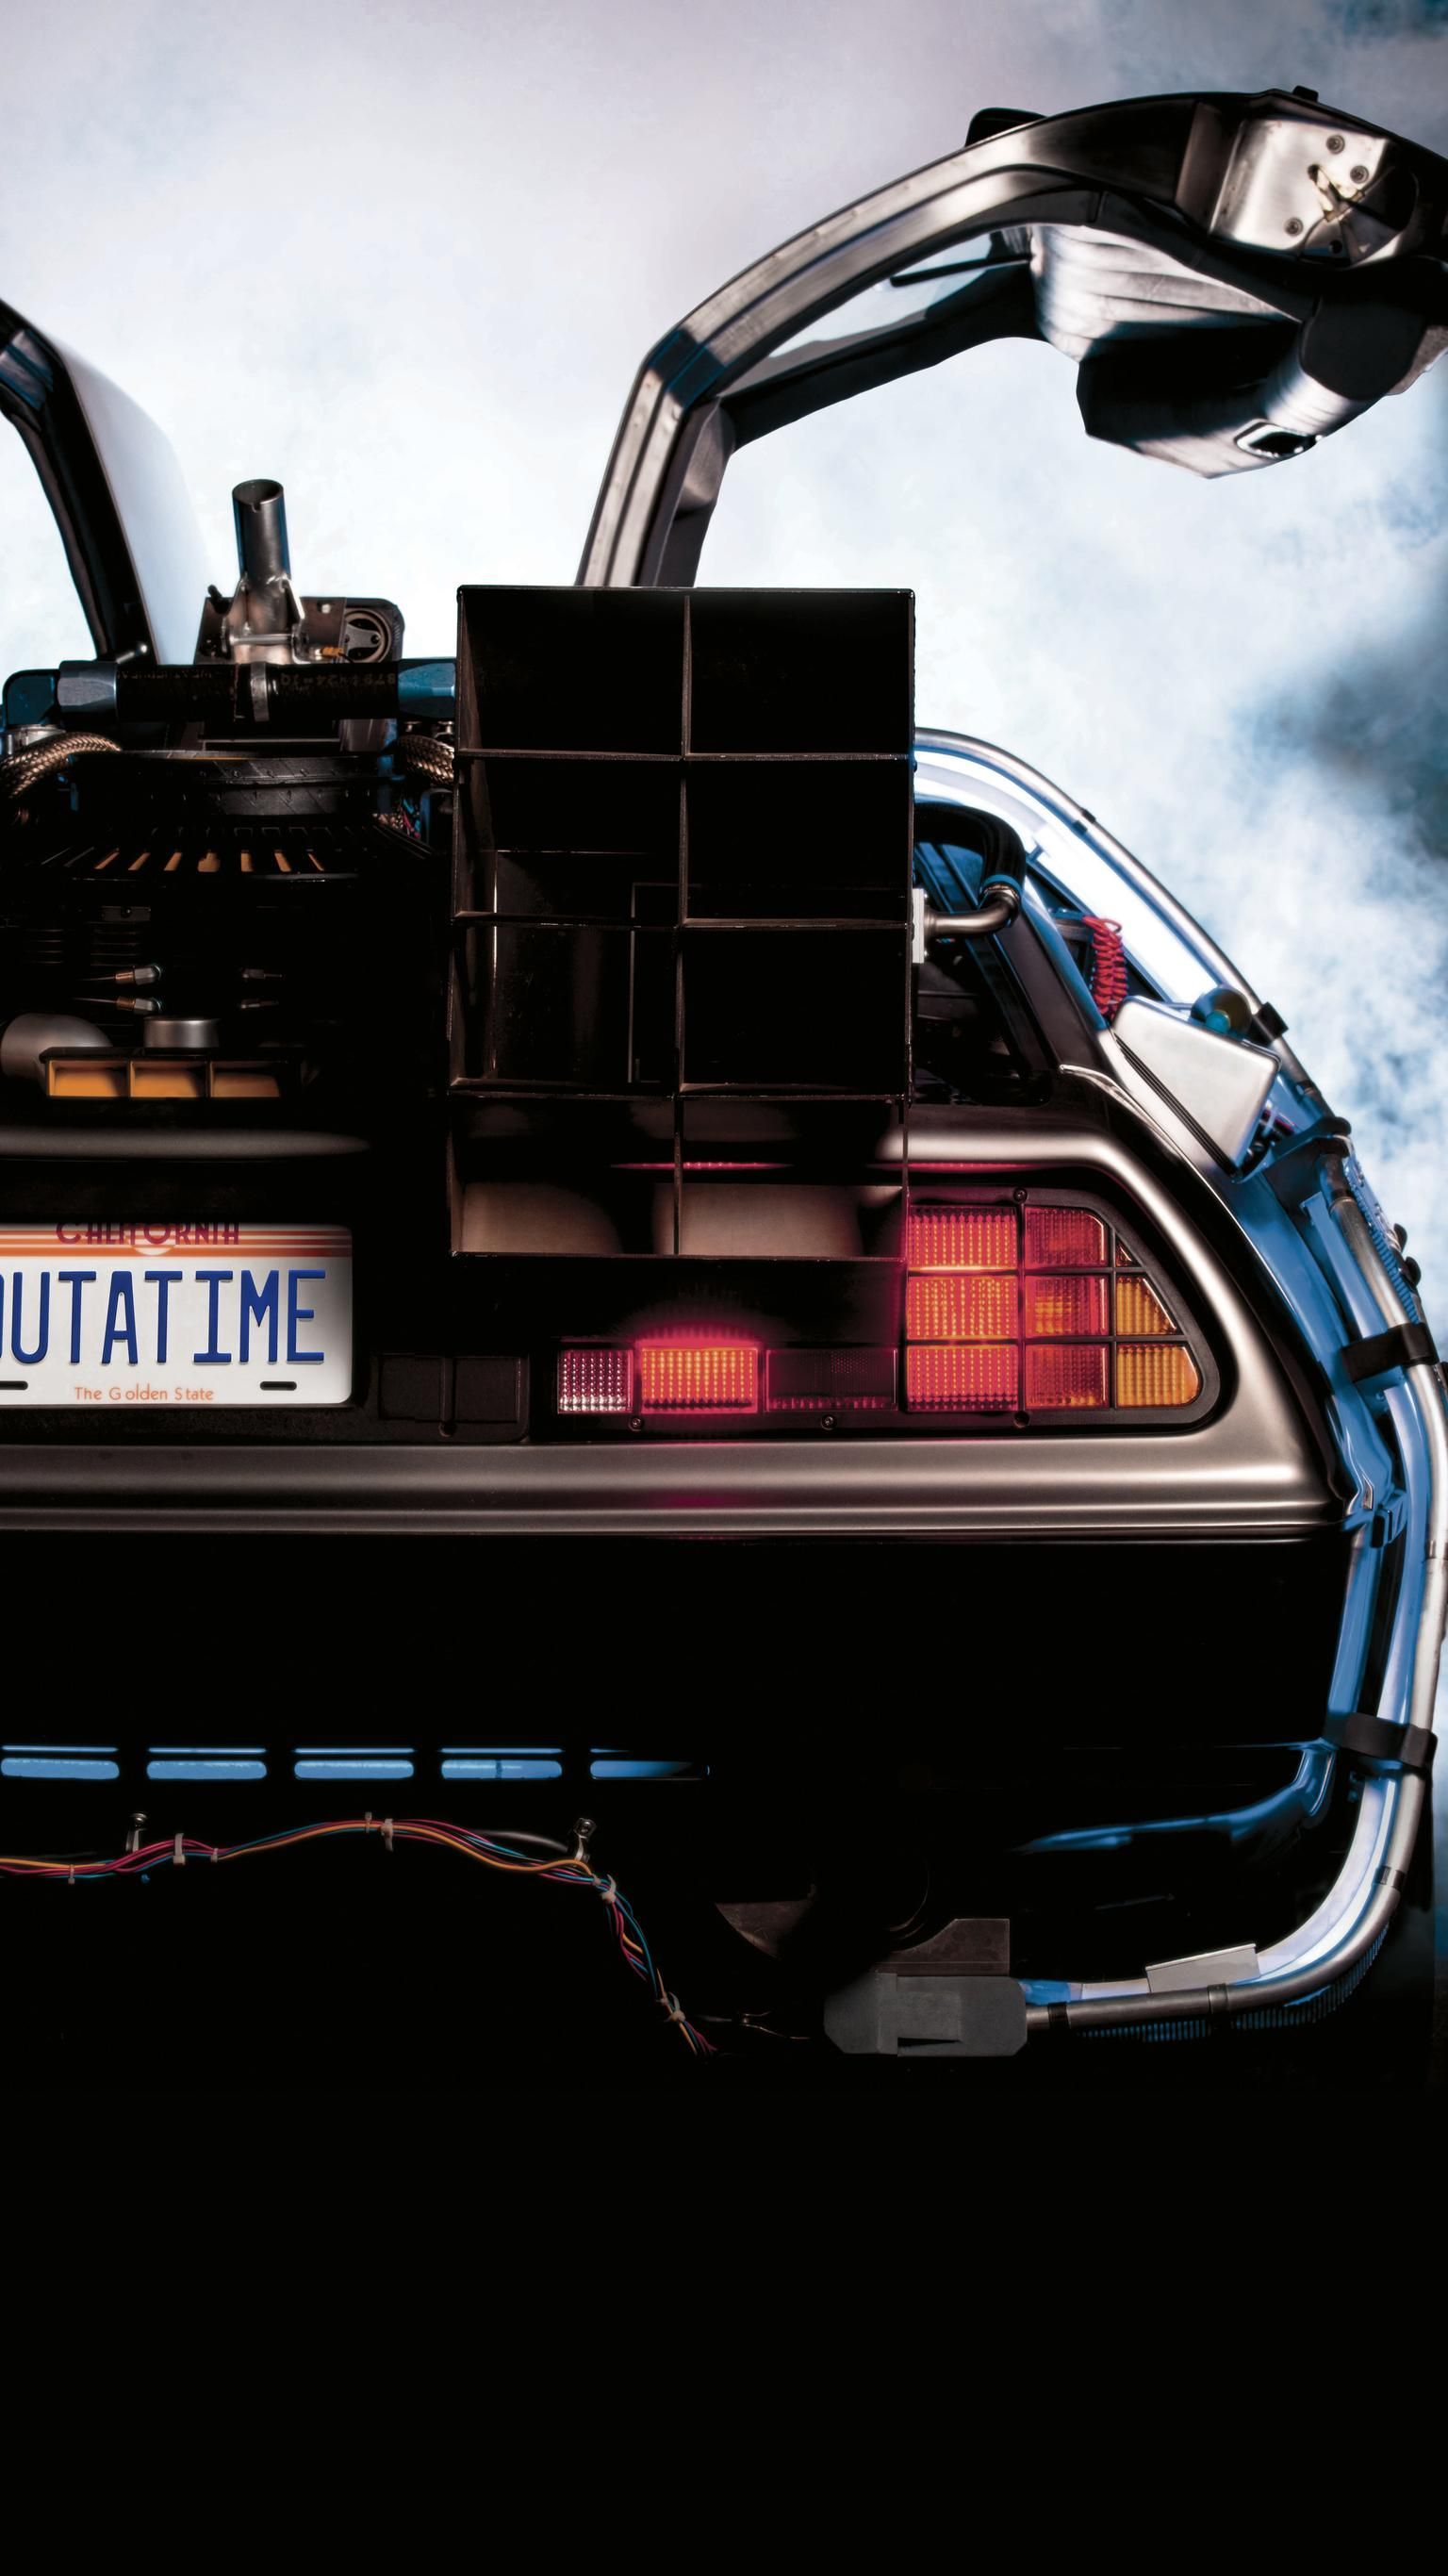 Back to the Future (1985) Phone Wallpaper. Moviemania. Future wallpaper, Back to the future, Future car